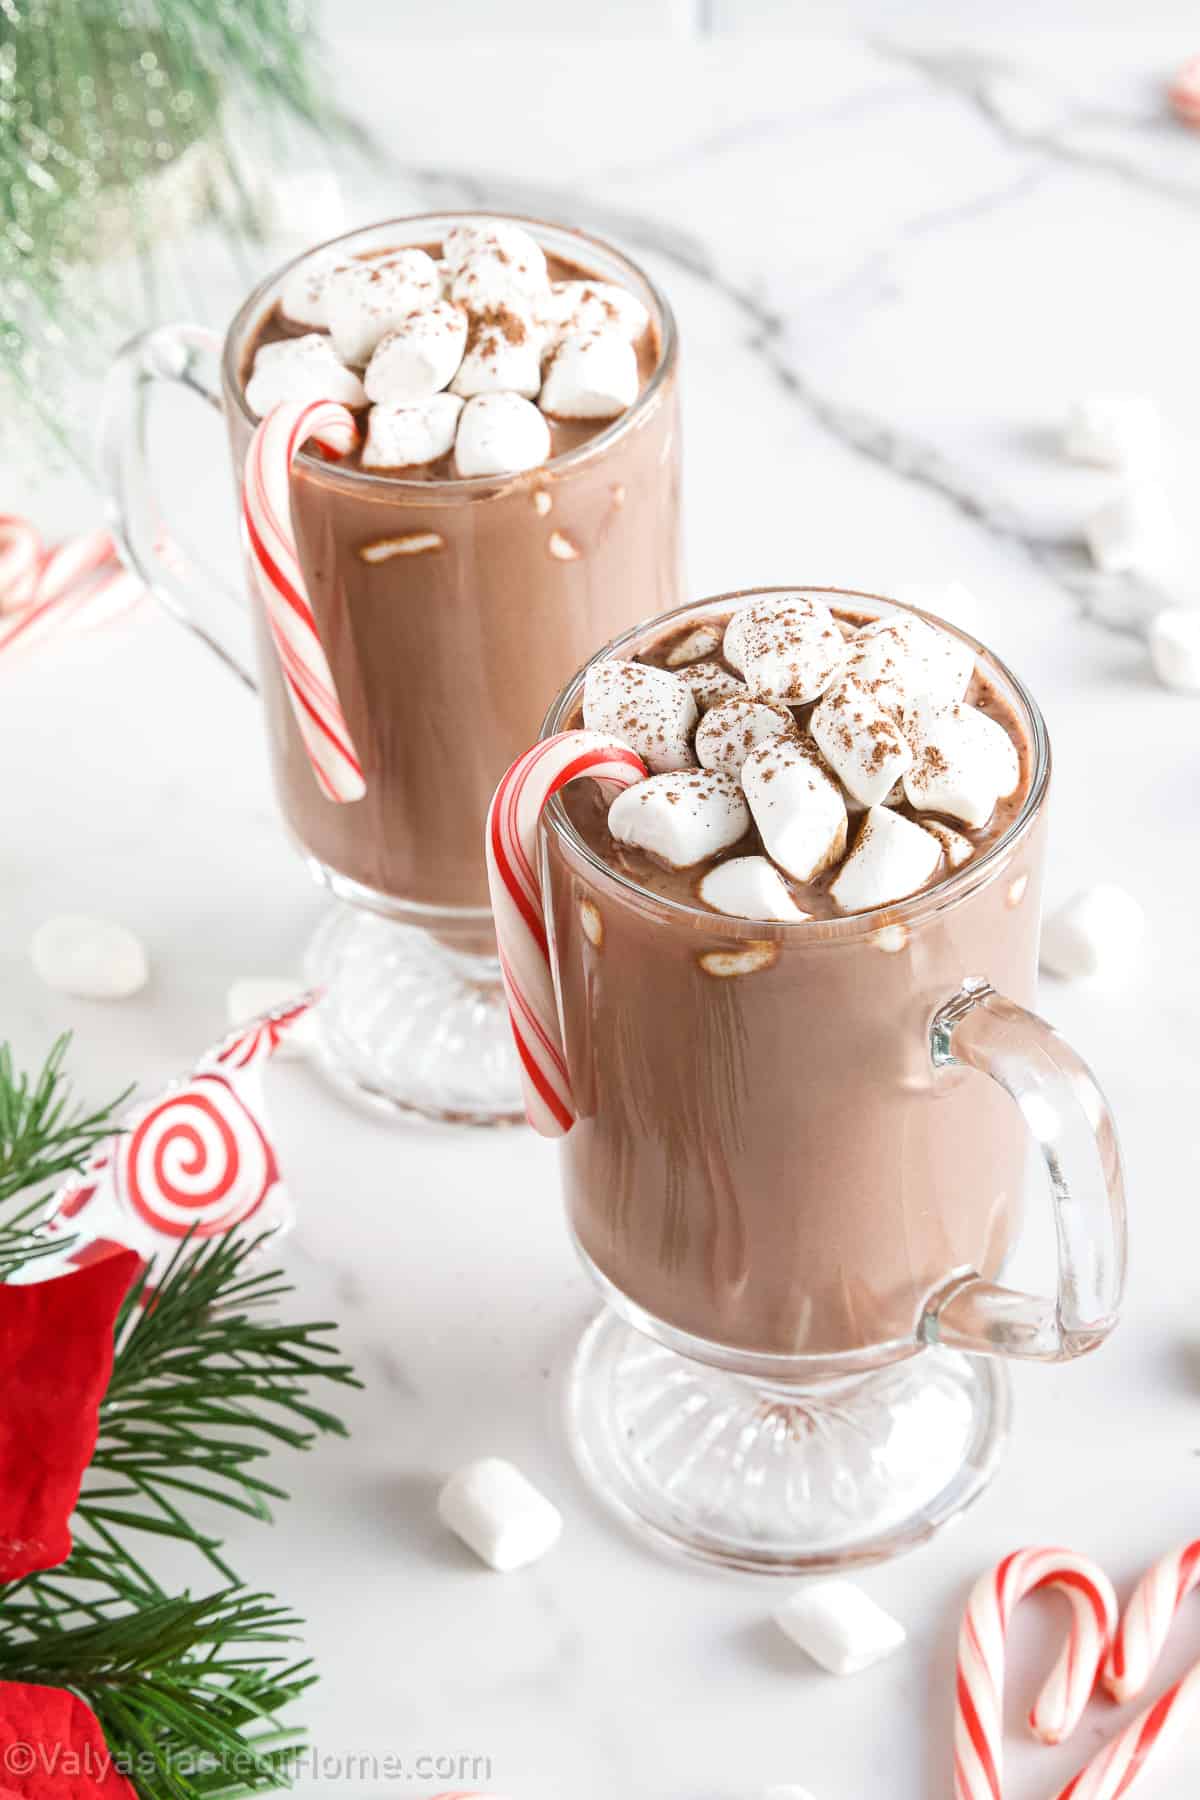 Hot chocolate, also known as hot cocoa or drinking chocolate, is the most delicious, heated drink that’s made of shaved chocolate or chocolate chips, cocoa powder, warm heated milk, and a light sweetener to bring everything together.